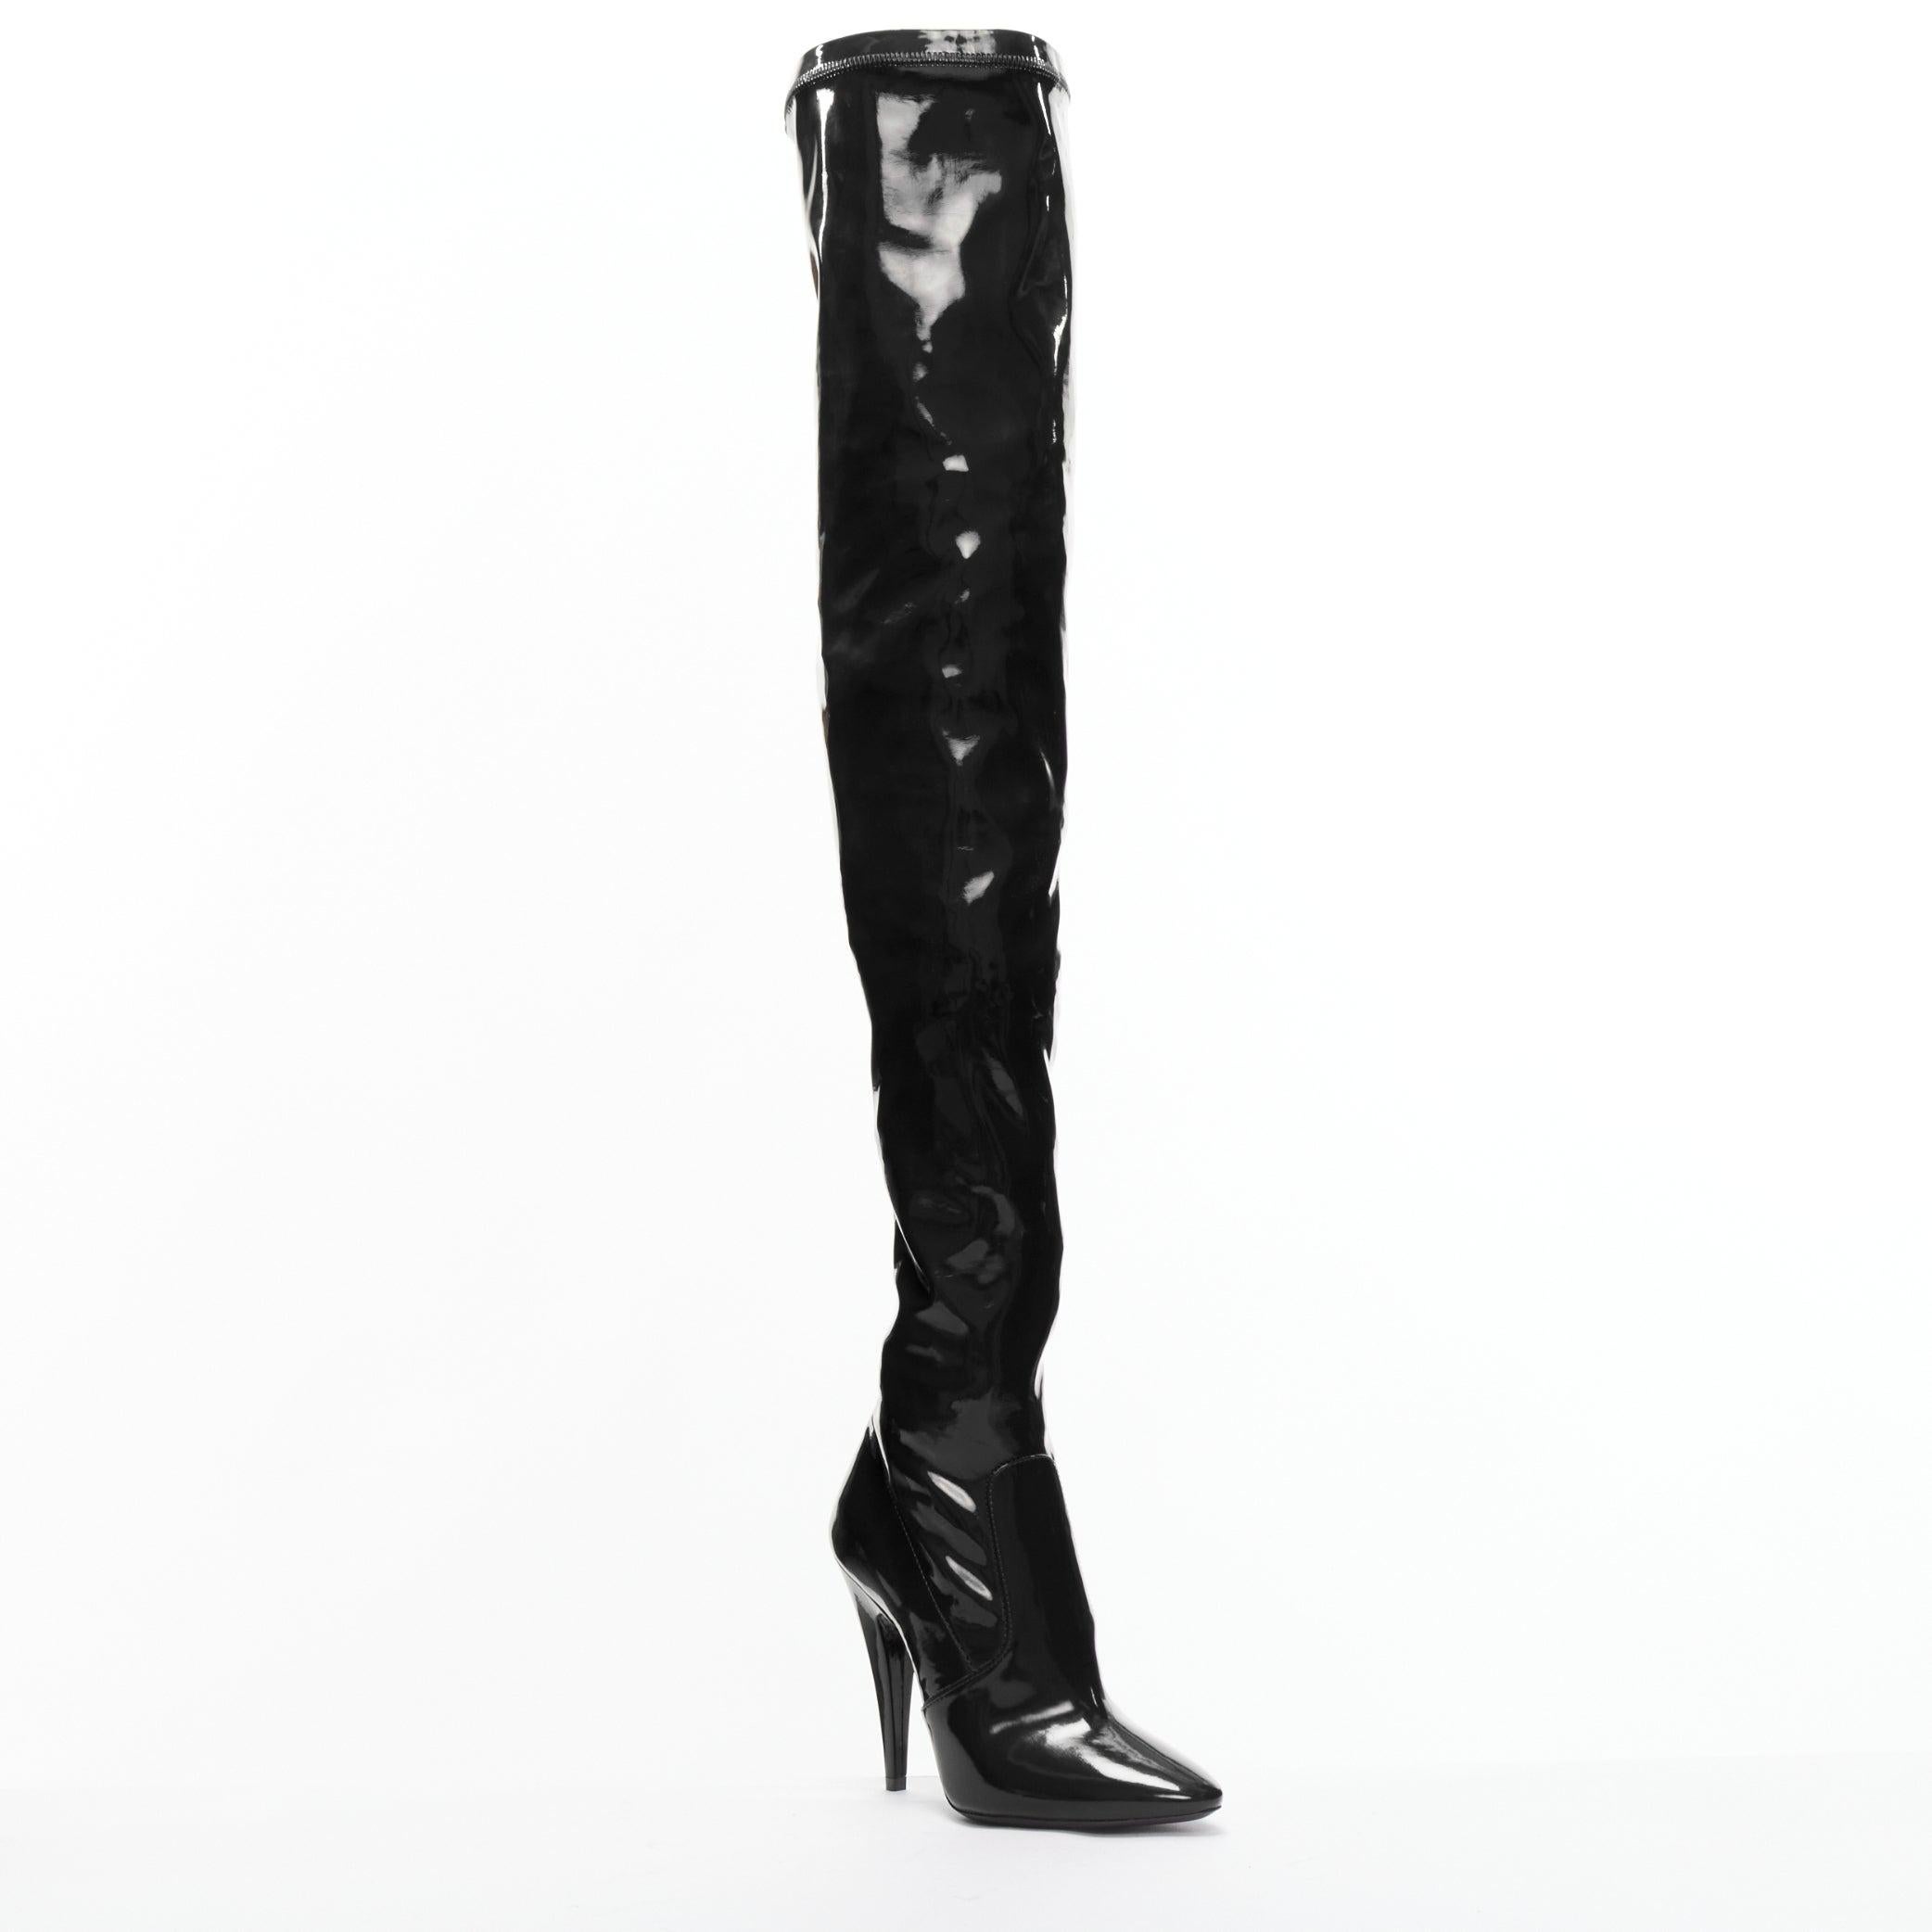 New SAINT LAURENT Aylah 110 Runway black vinyl thigh high boots EU37
Reference: TGAS/D00743
Brand: Saint Laurent
Designer: Anthony Vaccarello
Model: Aylah 110
Collection: Fall 2020 - Runway
Material: PVC
Color: Black
Pattern: Solid
Closure: